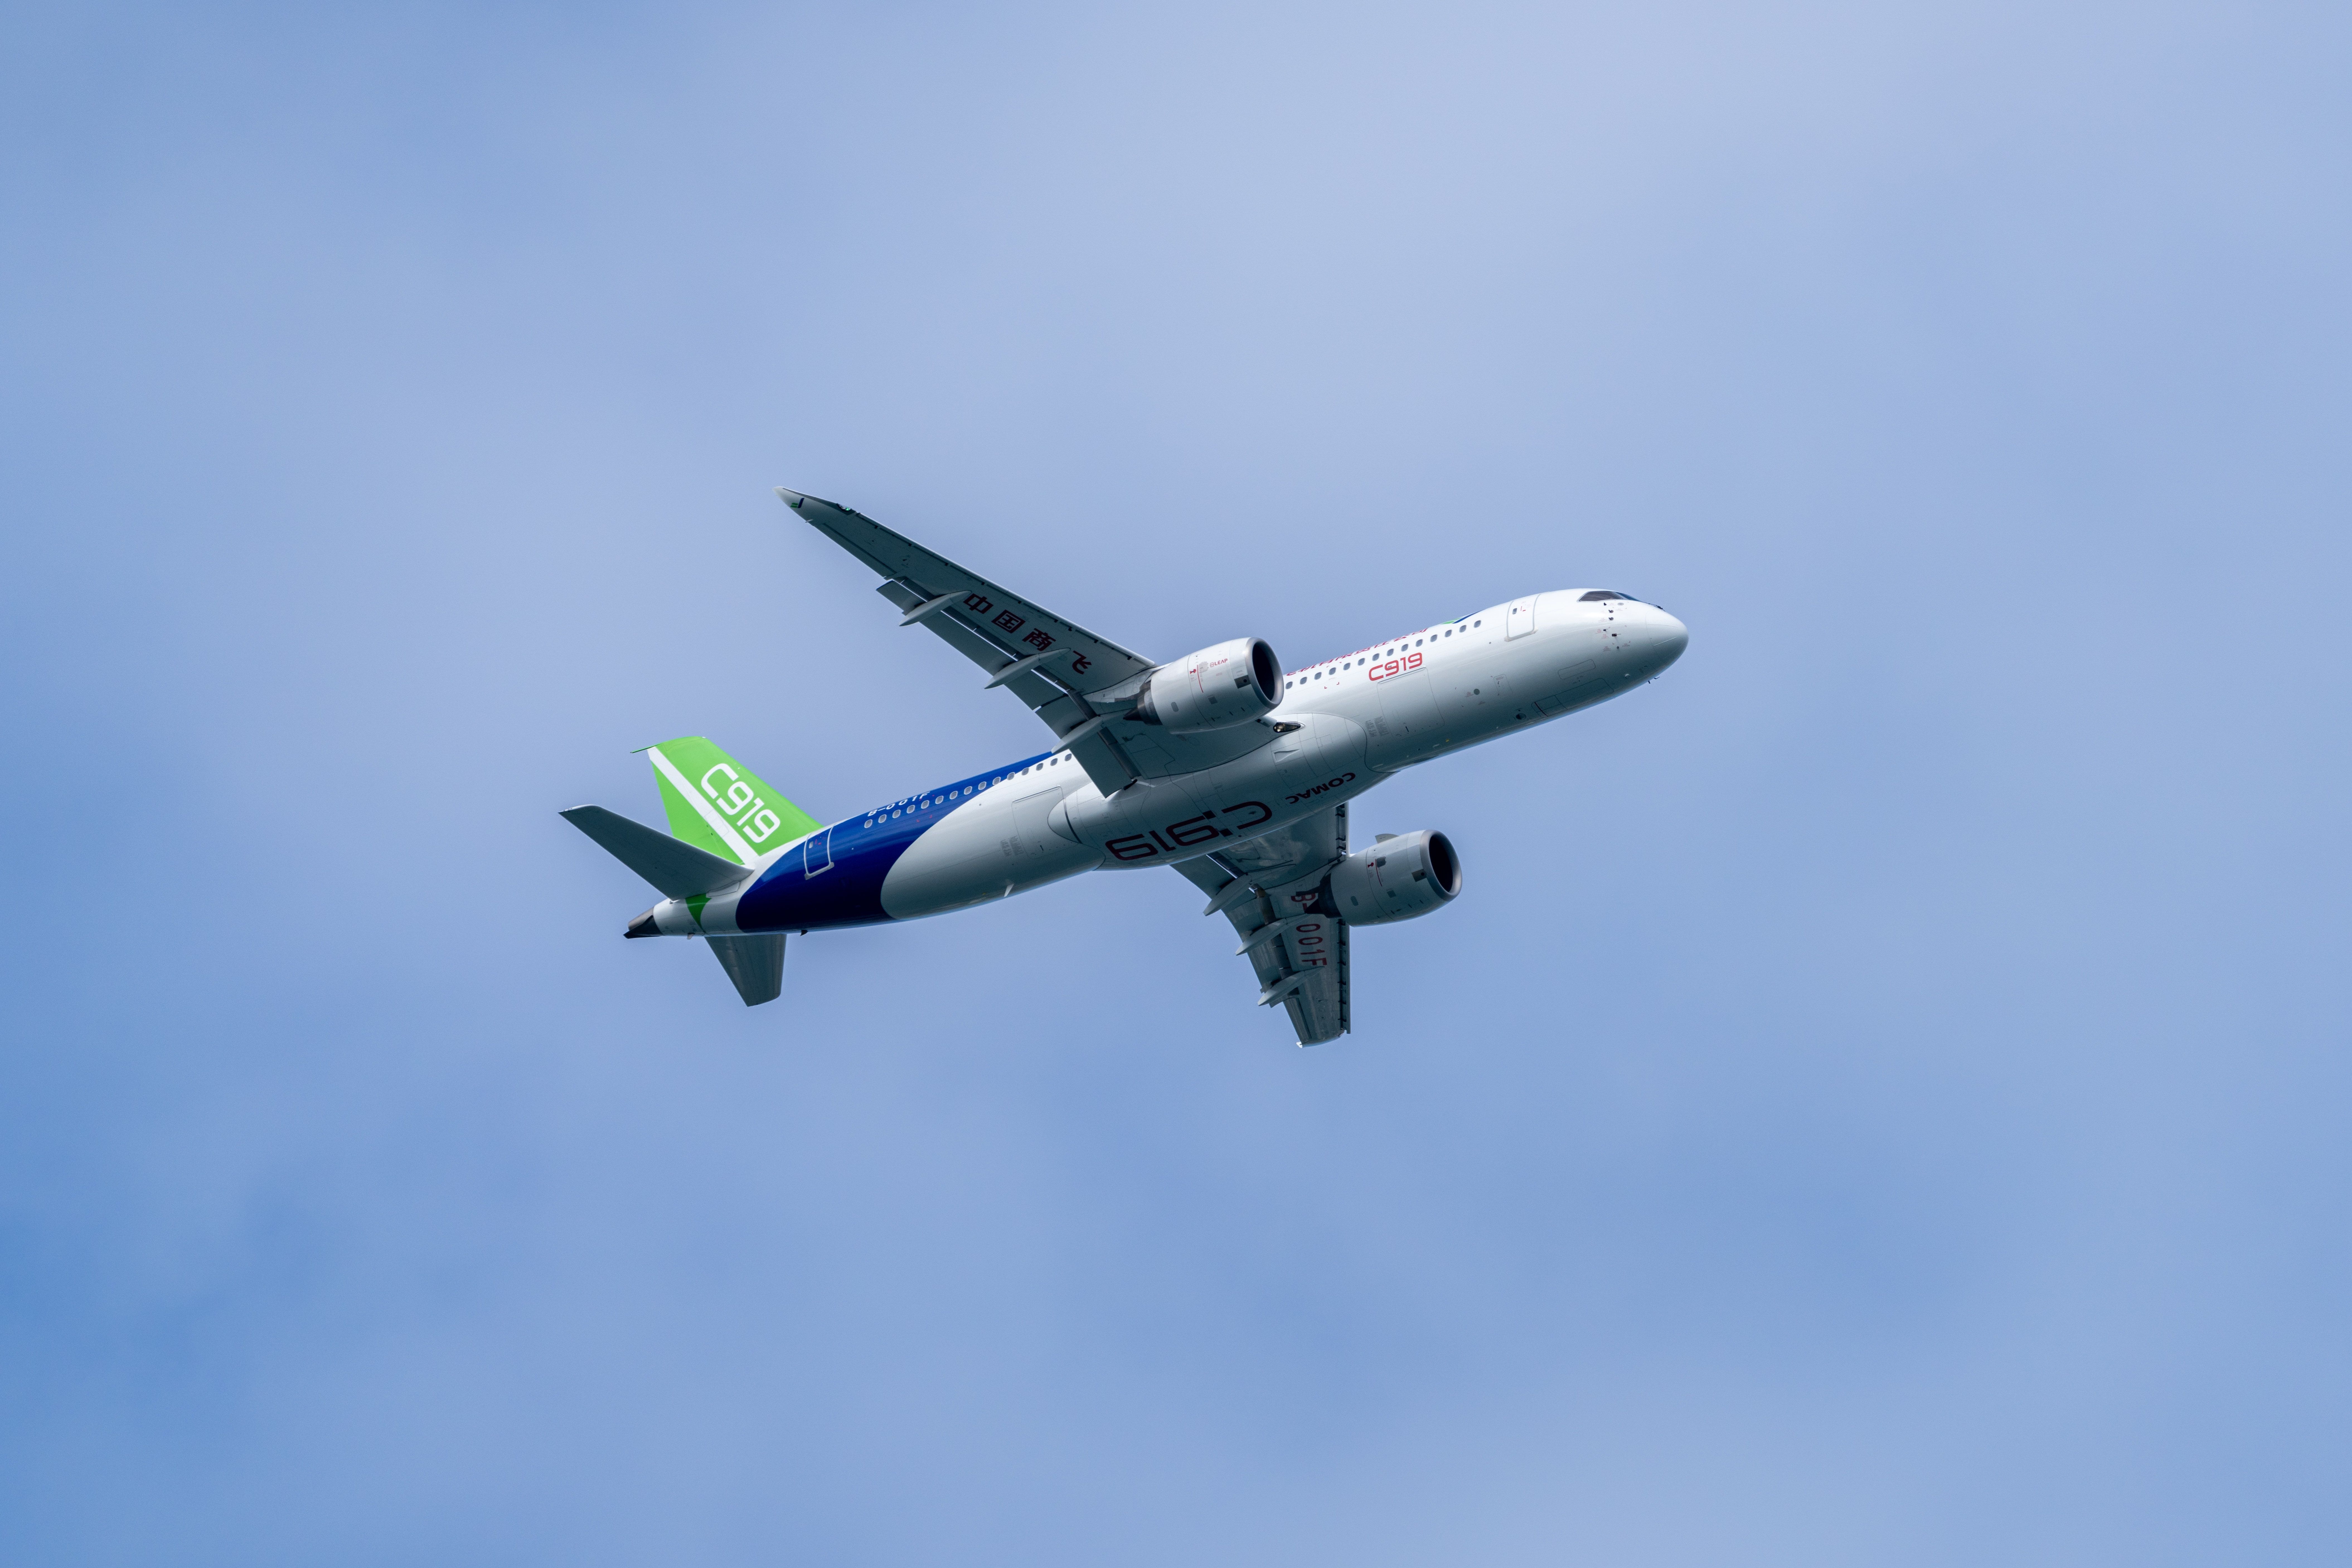 Comac C919 flying over Hong Kong Victoria Harbour. The C919 is a narrow-body airliner developed by Chinese aircraft manufacturer Comac.